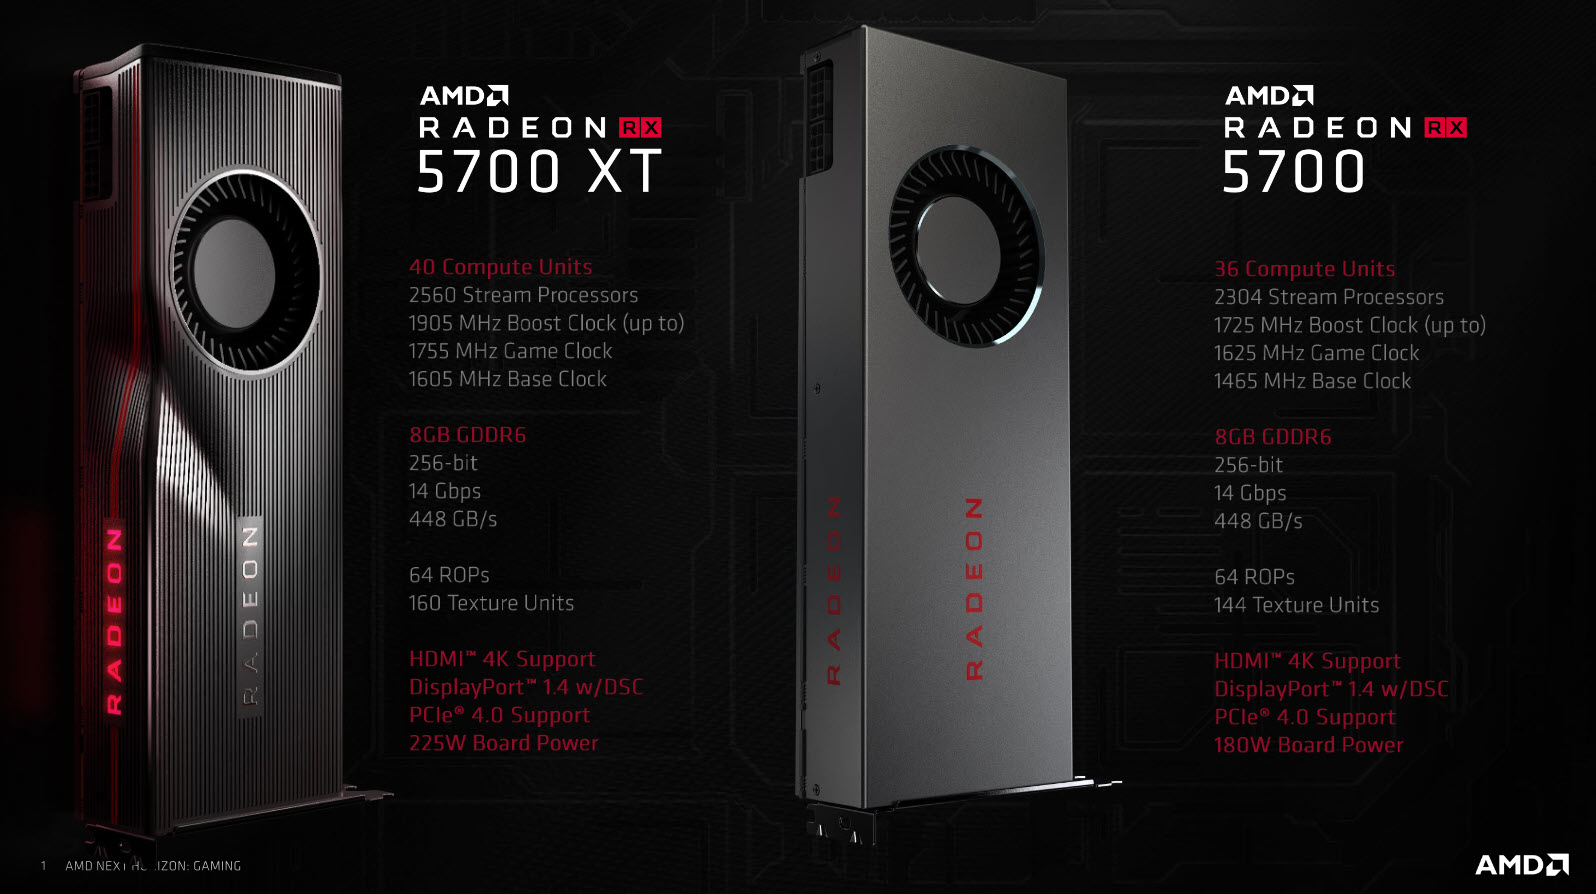 2019 07 07 9 00 19 AMD RADEON RX 5700 REVIEW 